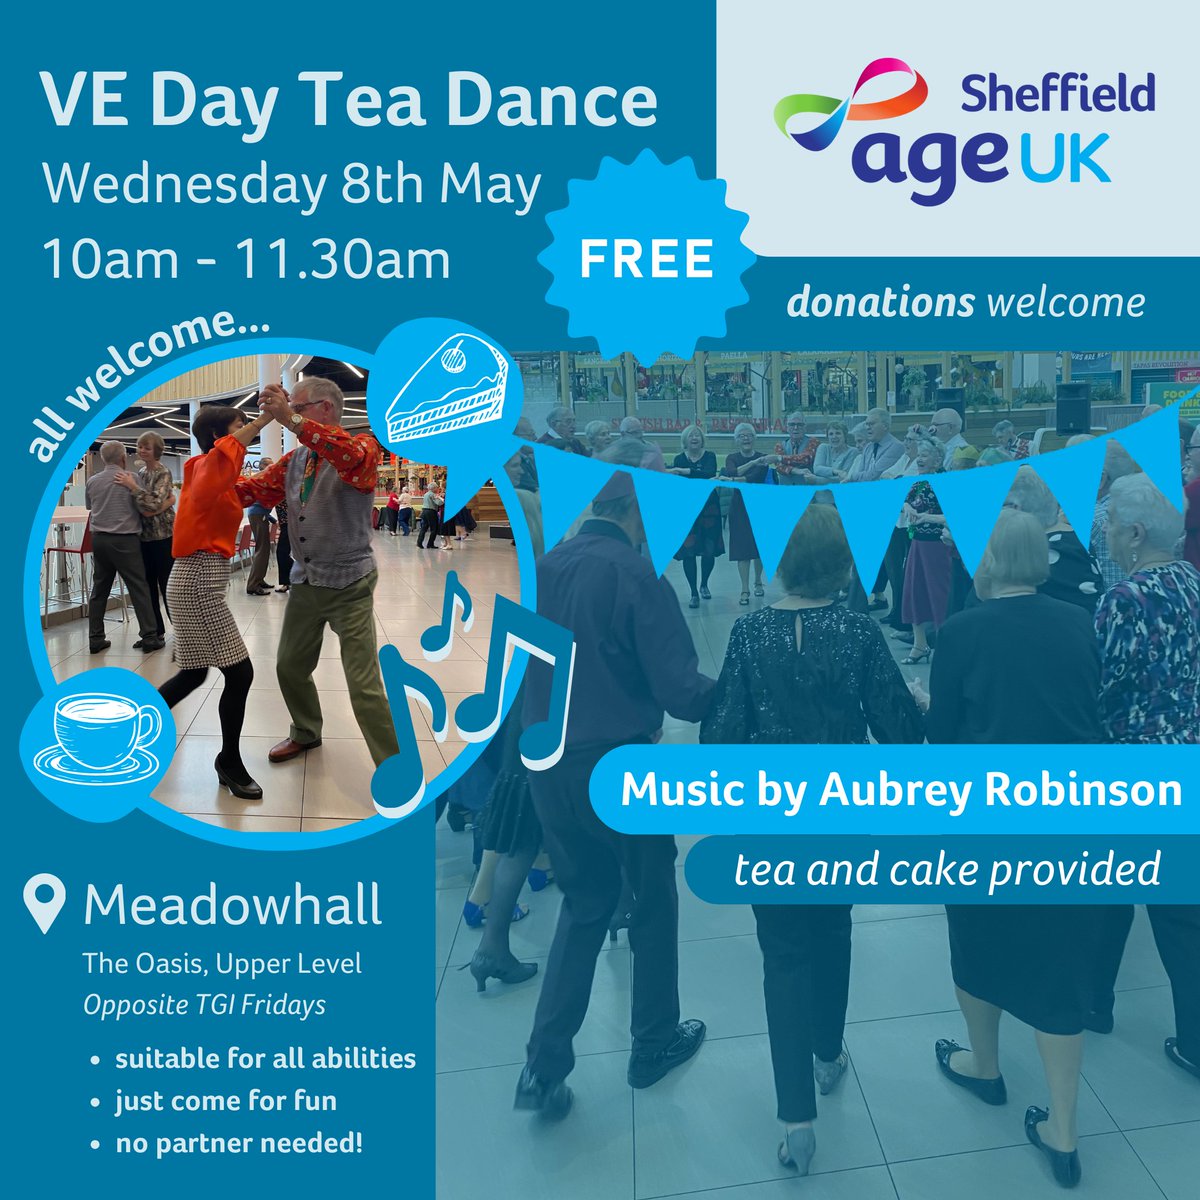 We're hosting a VE Day celebratory Tea Dance on Wednesday 8th May🇬🇧 We're joined by @ageuksheffield who will be raising awareness and funds for their services💙 Everyone is welcome and the Tea Dance is suitable for all abilities! Find out more 👉meadowhall.co.uk/news/tea-dance